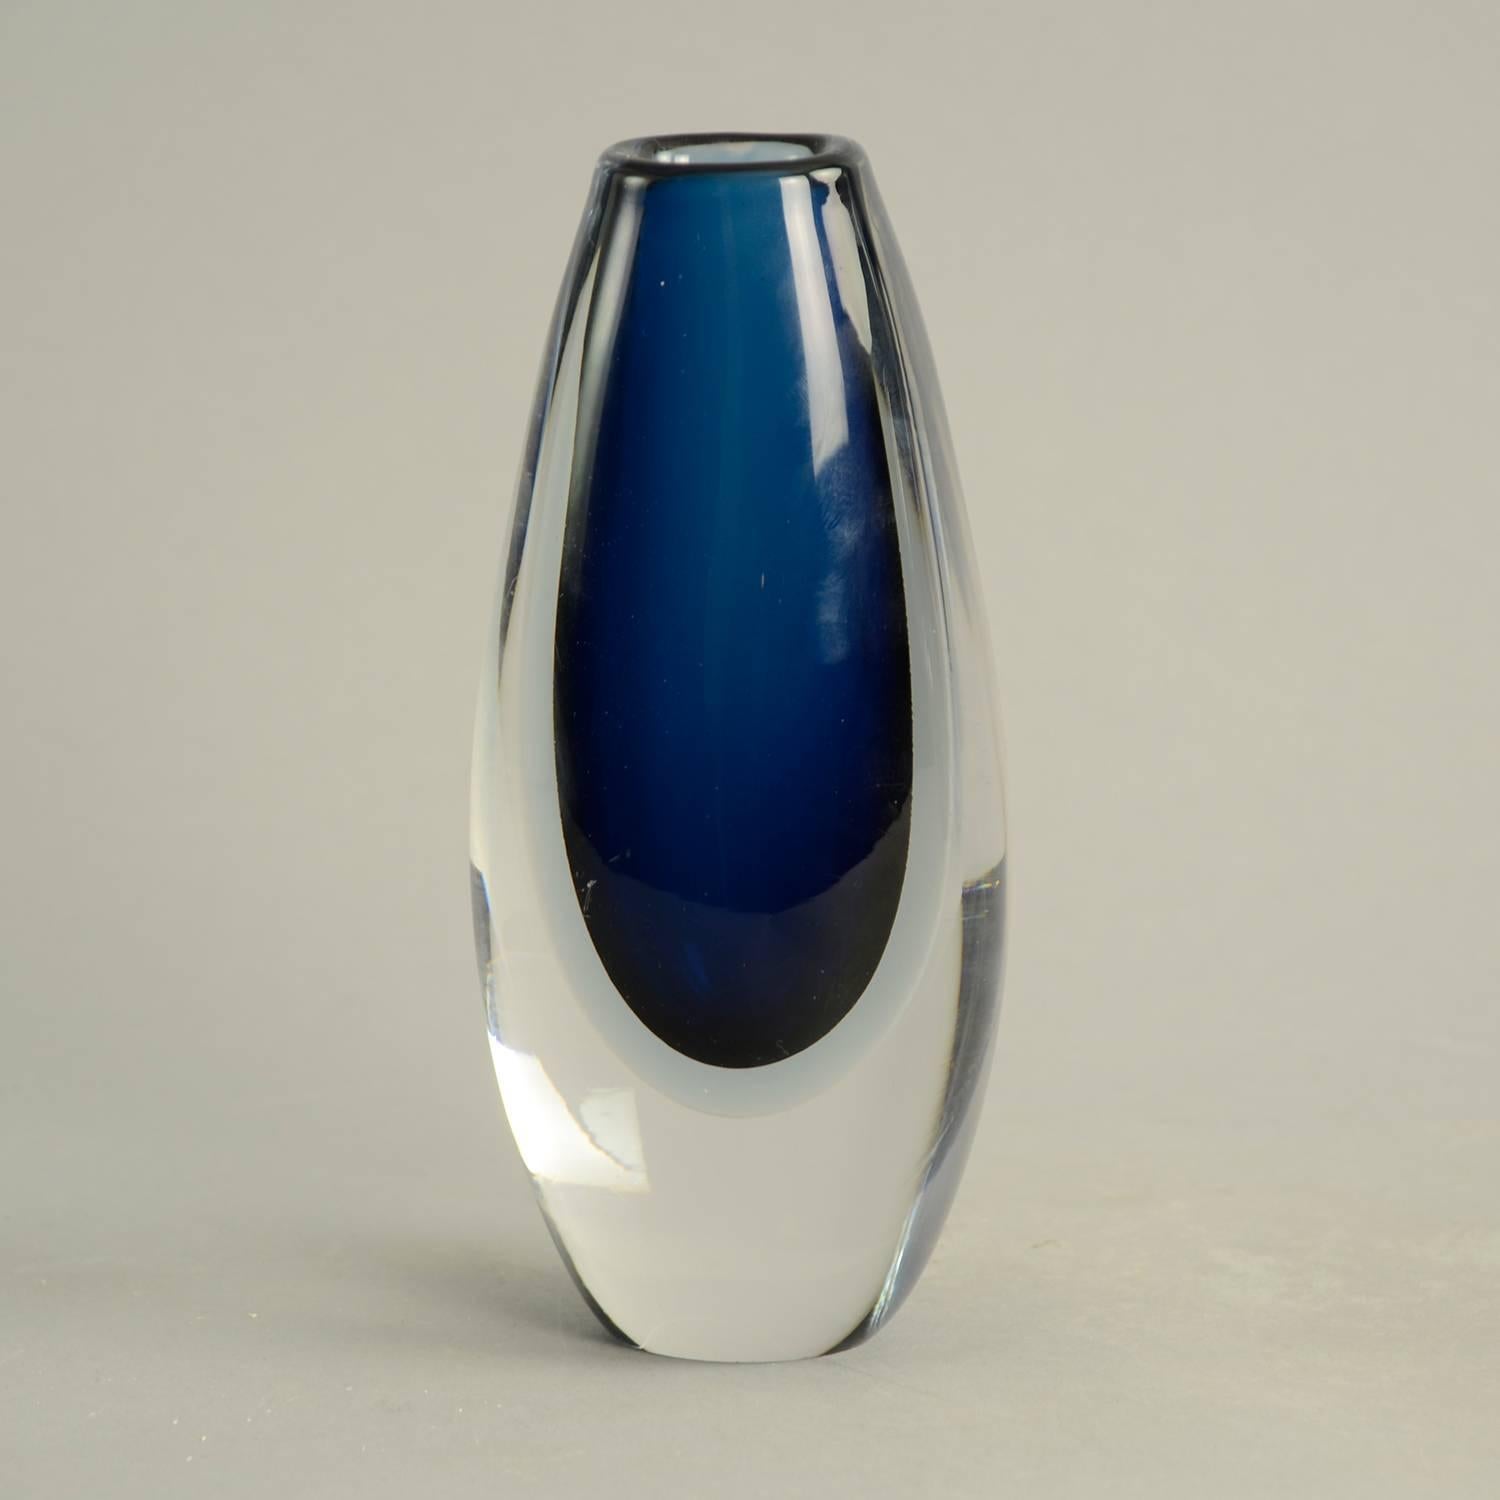 Scandinavian Modern Sommerso Vase in Blue and Clear Glass, 1950s by Vicke Lindstrand for Kosta For Sale